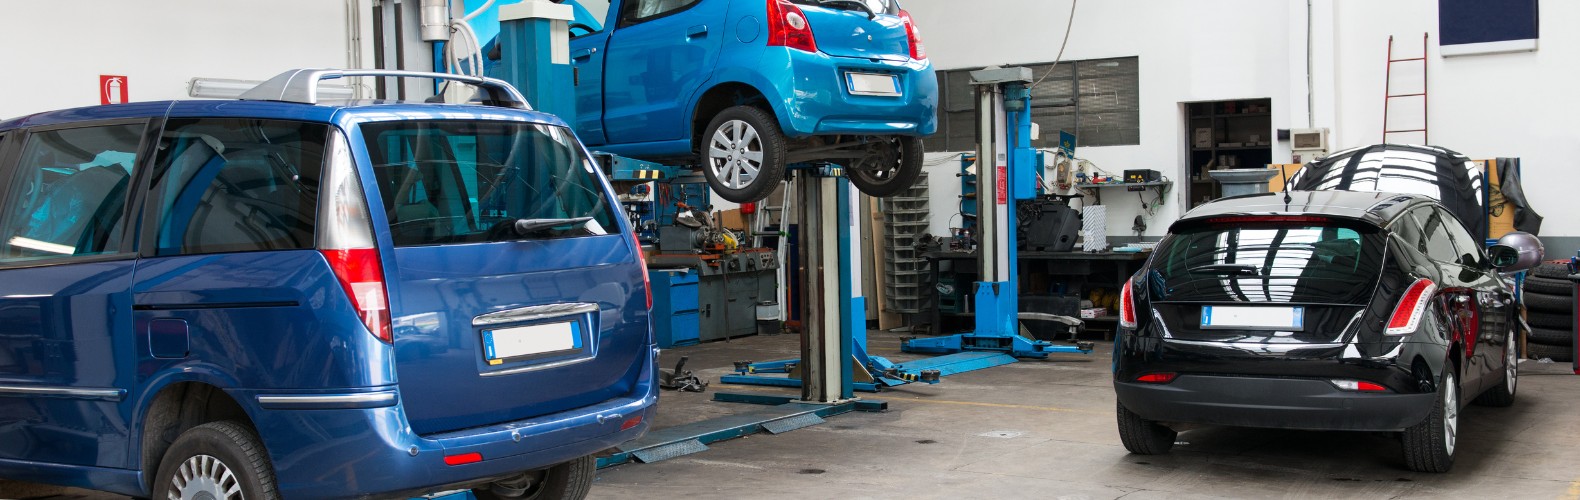 How to Choose the Right Garage Liability Coverage for Your Business